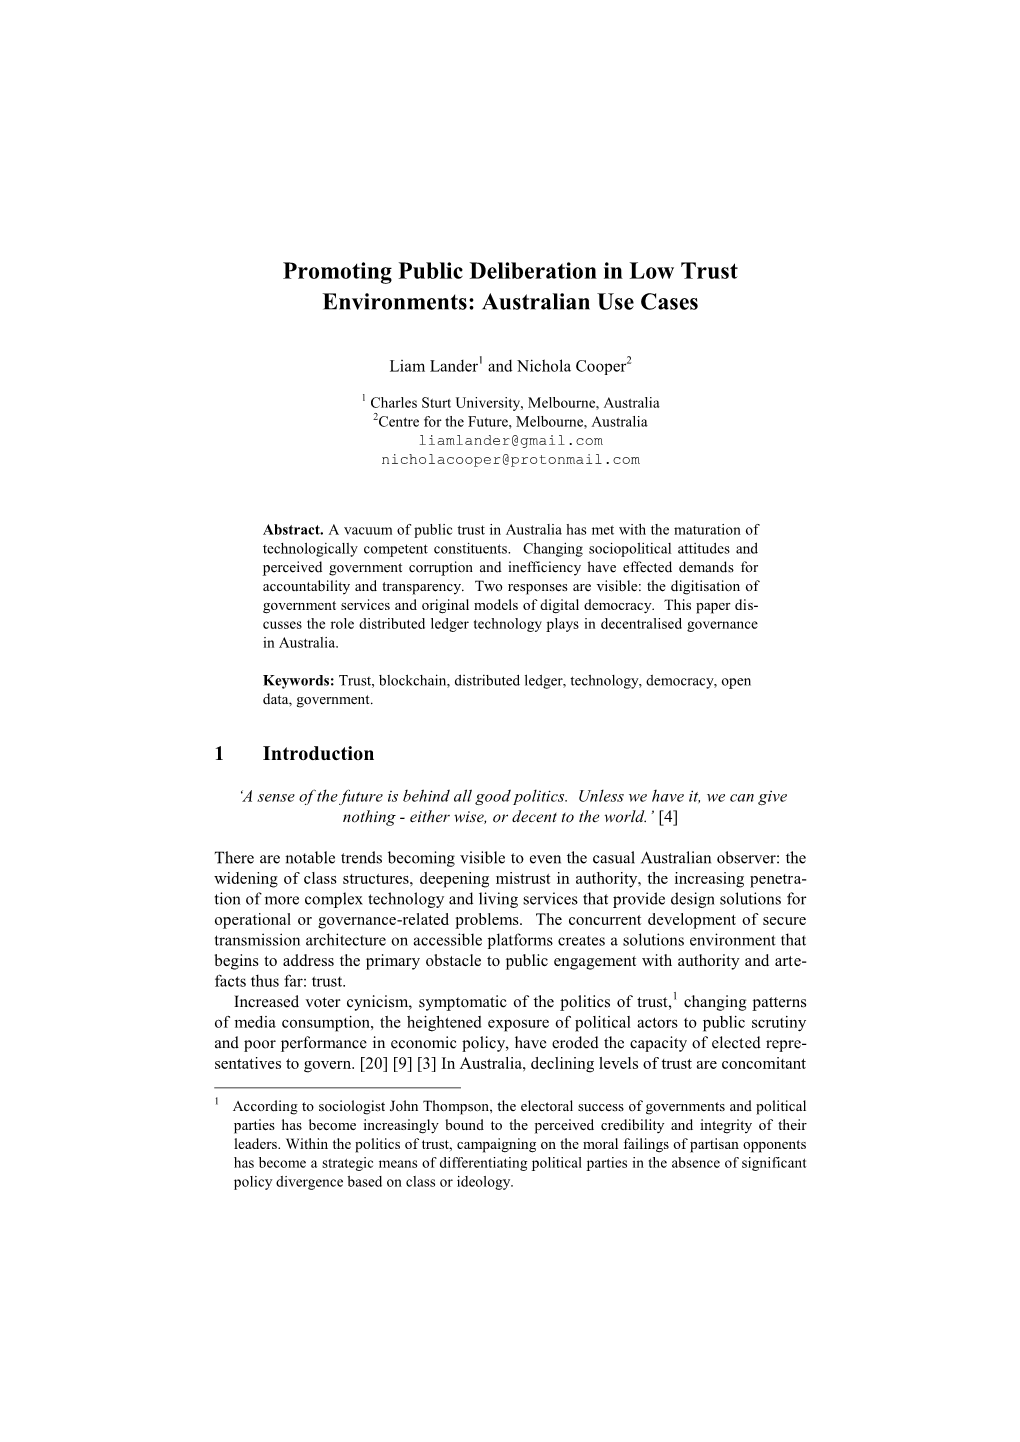 Promoting Public Deliberation in Low Trust Environments: Australian Use Cases